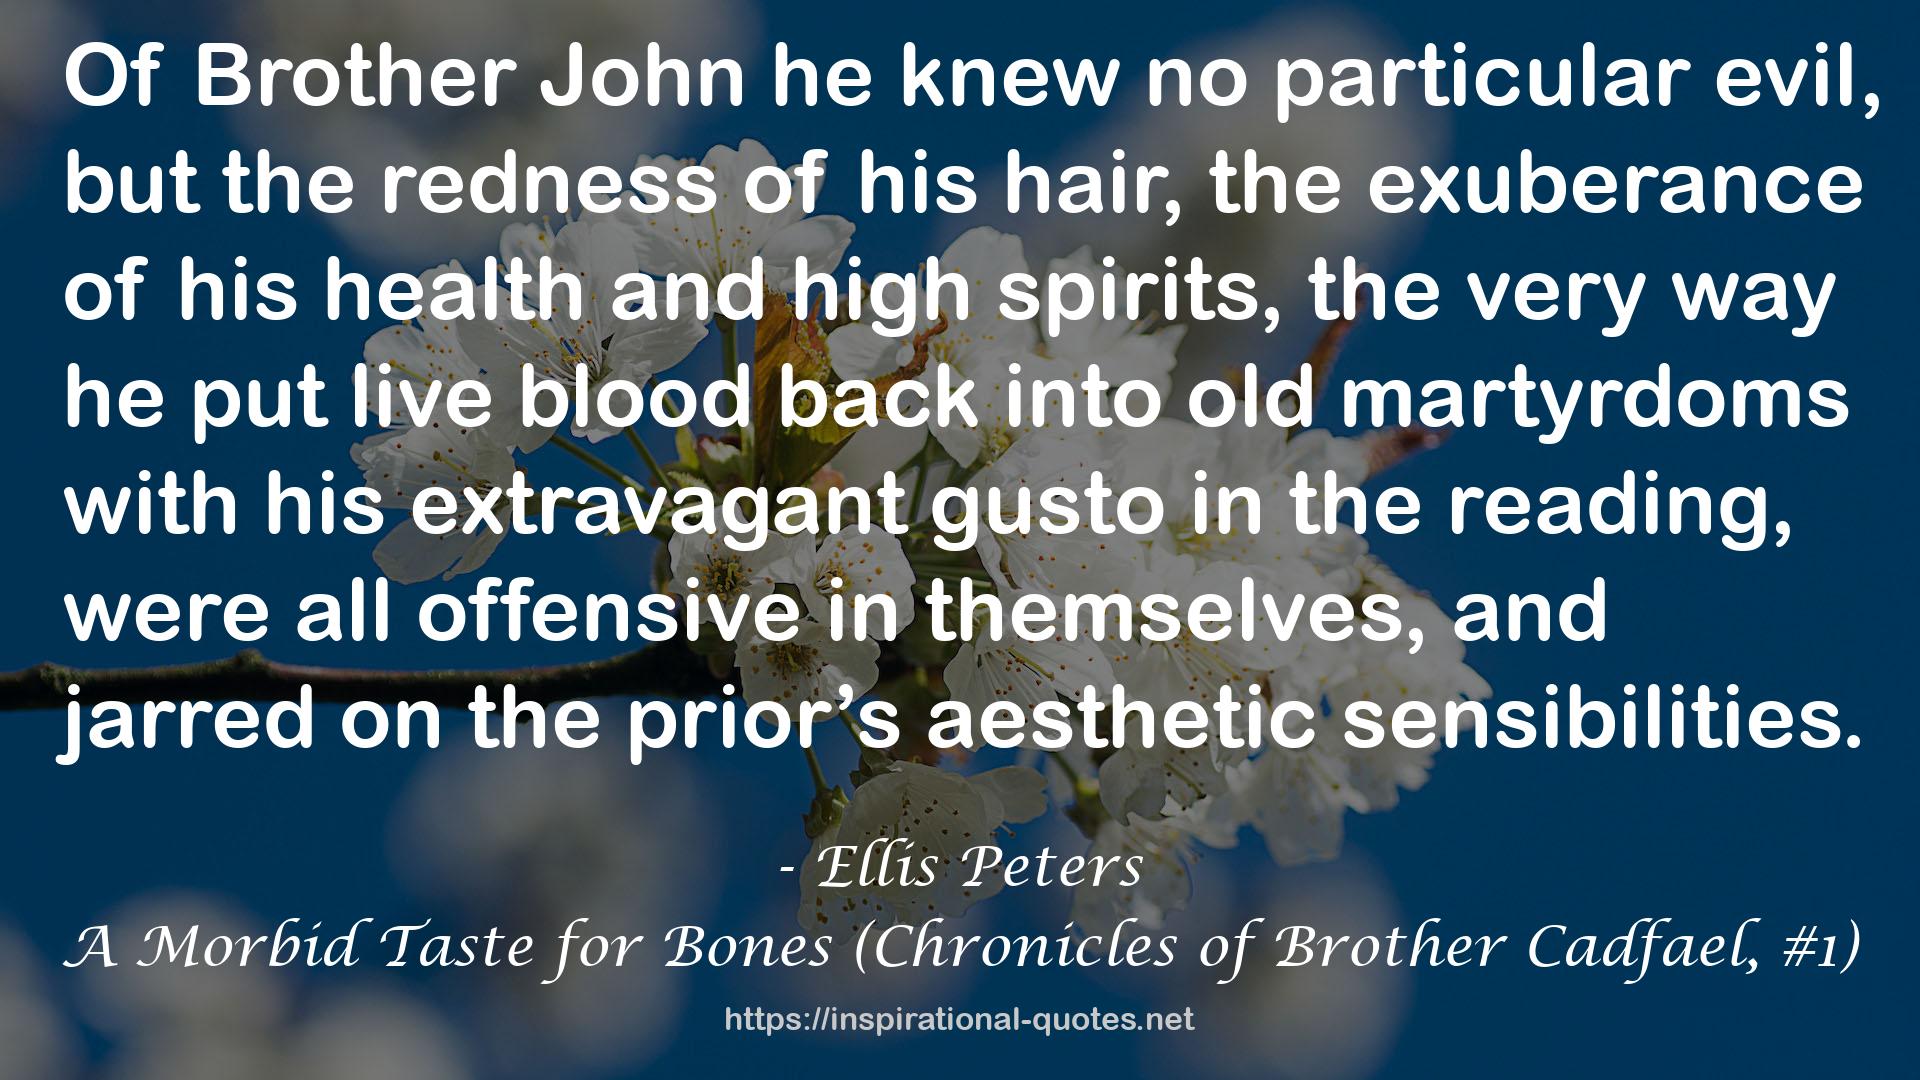 A Morbid Taste for Bones (Chronicles of Brother Cadfael, #1) QUOTES